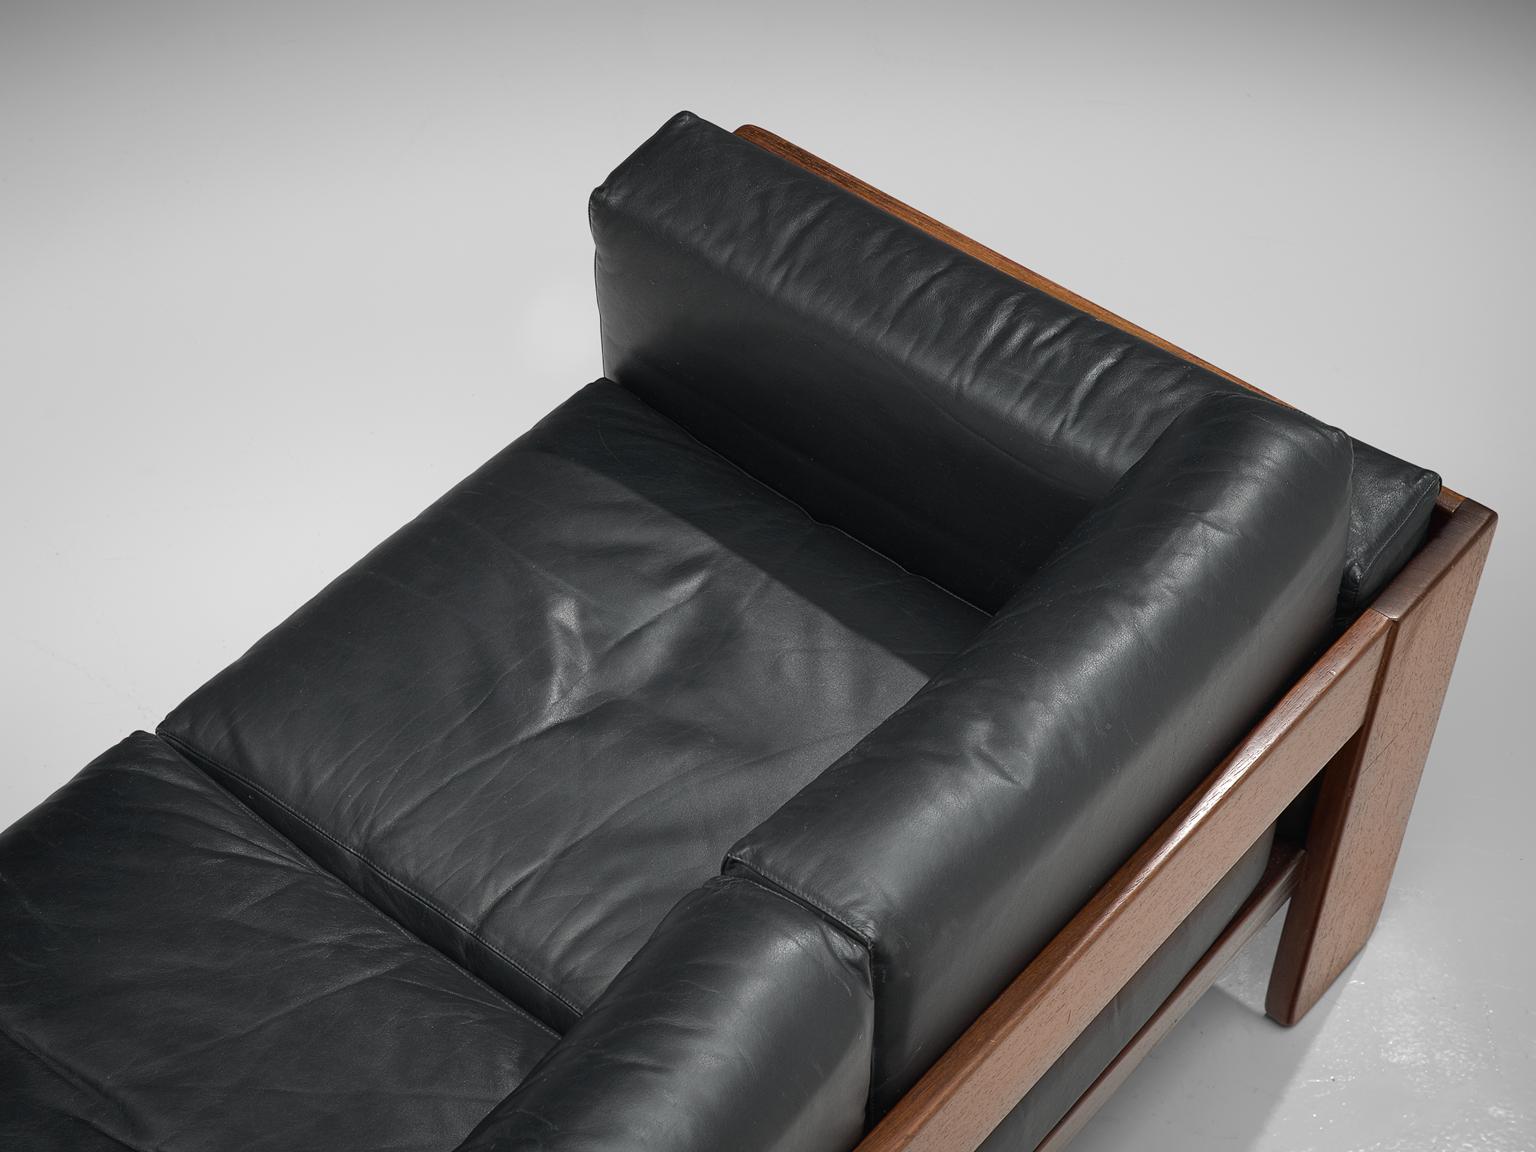 Tobia Scarpa 'Bastiano' Living Room Set in Walnut and Black Leather 1